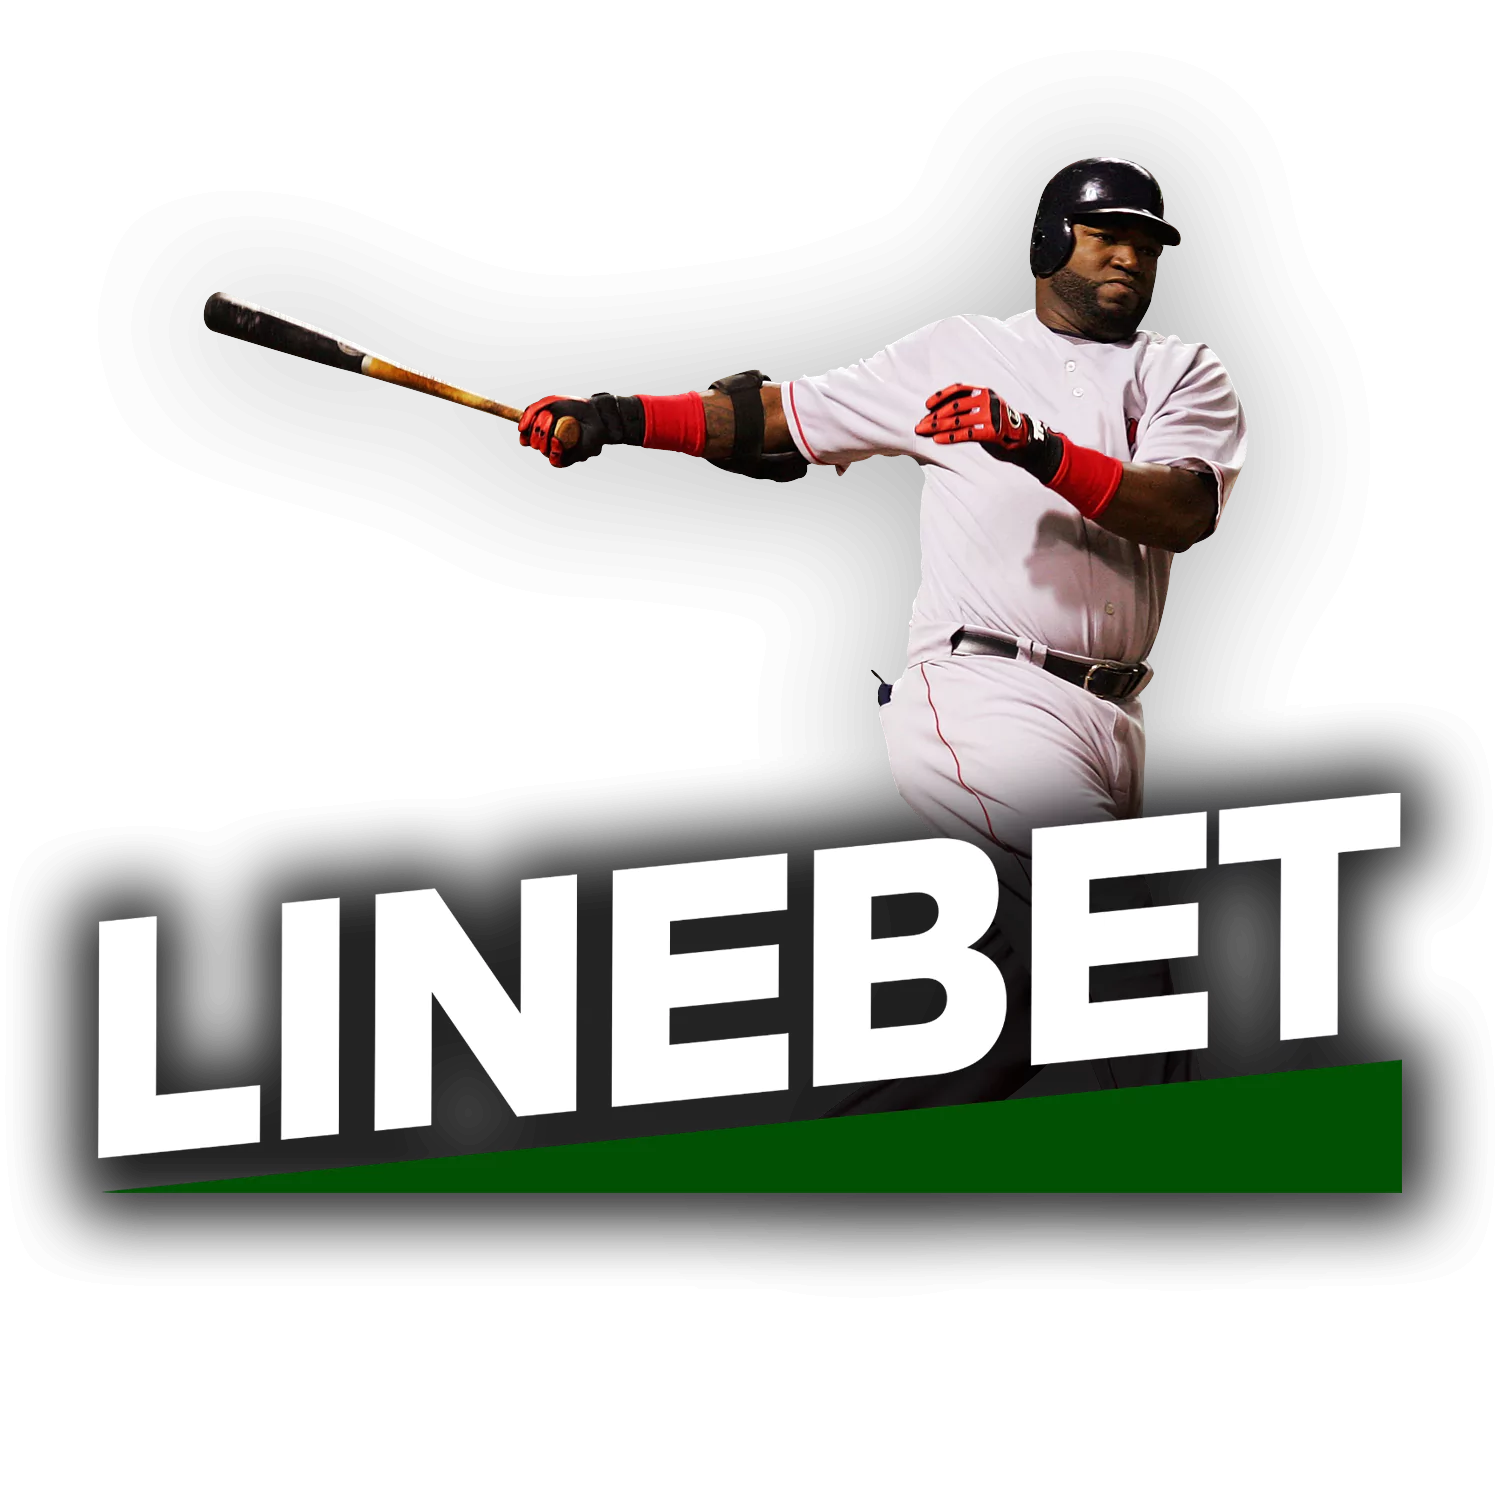 Learn how to place bets on baseball events on Linebet.